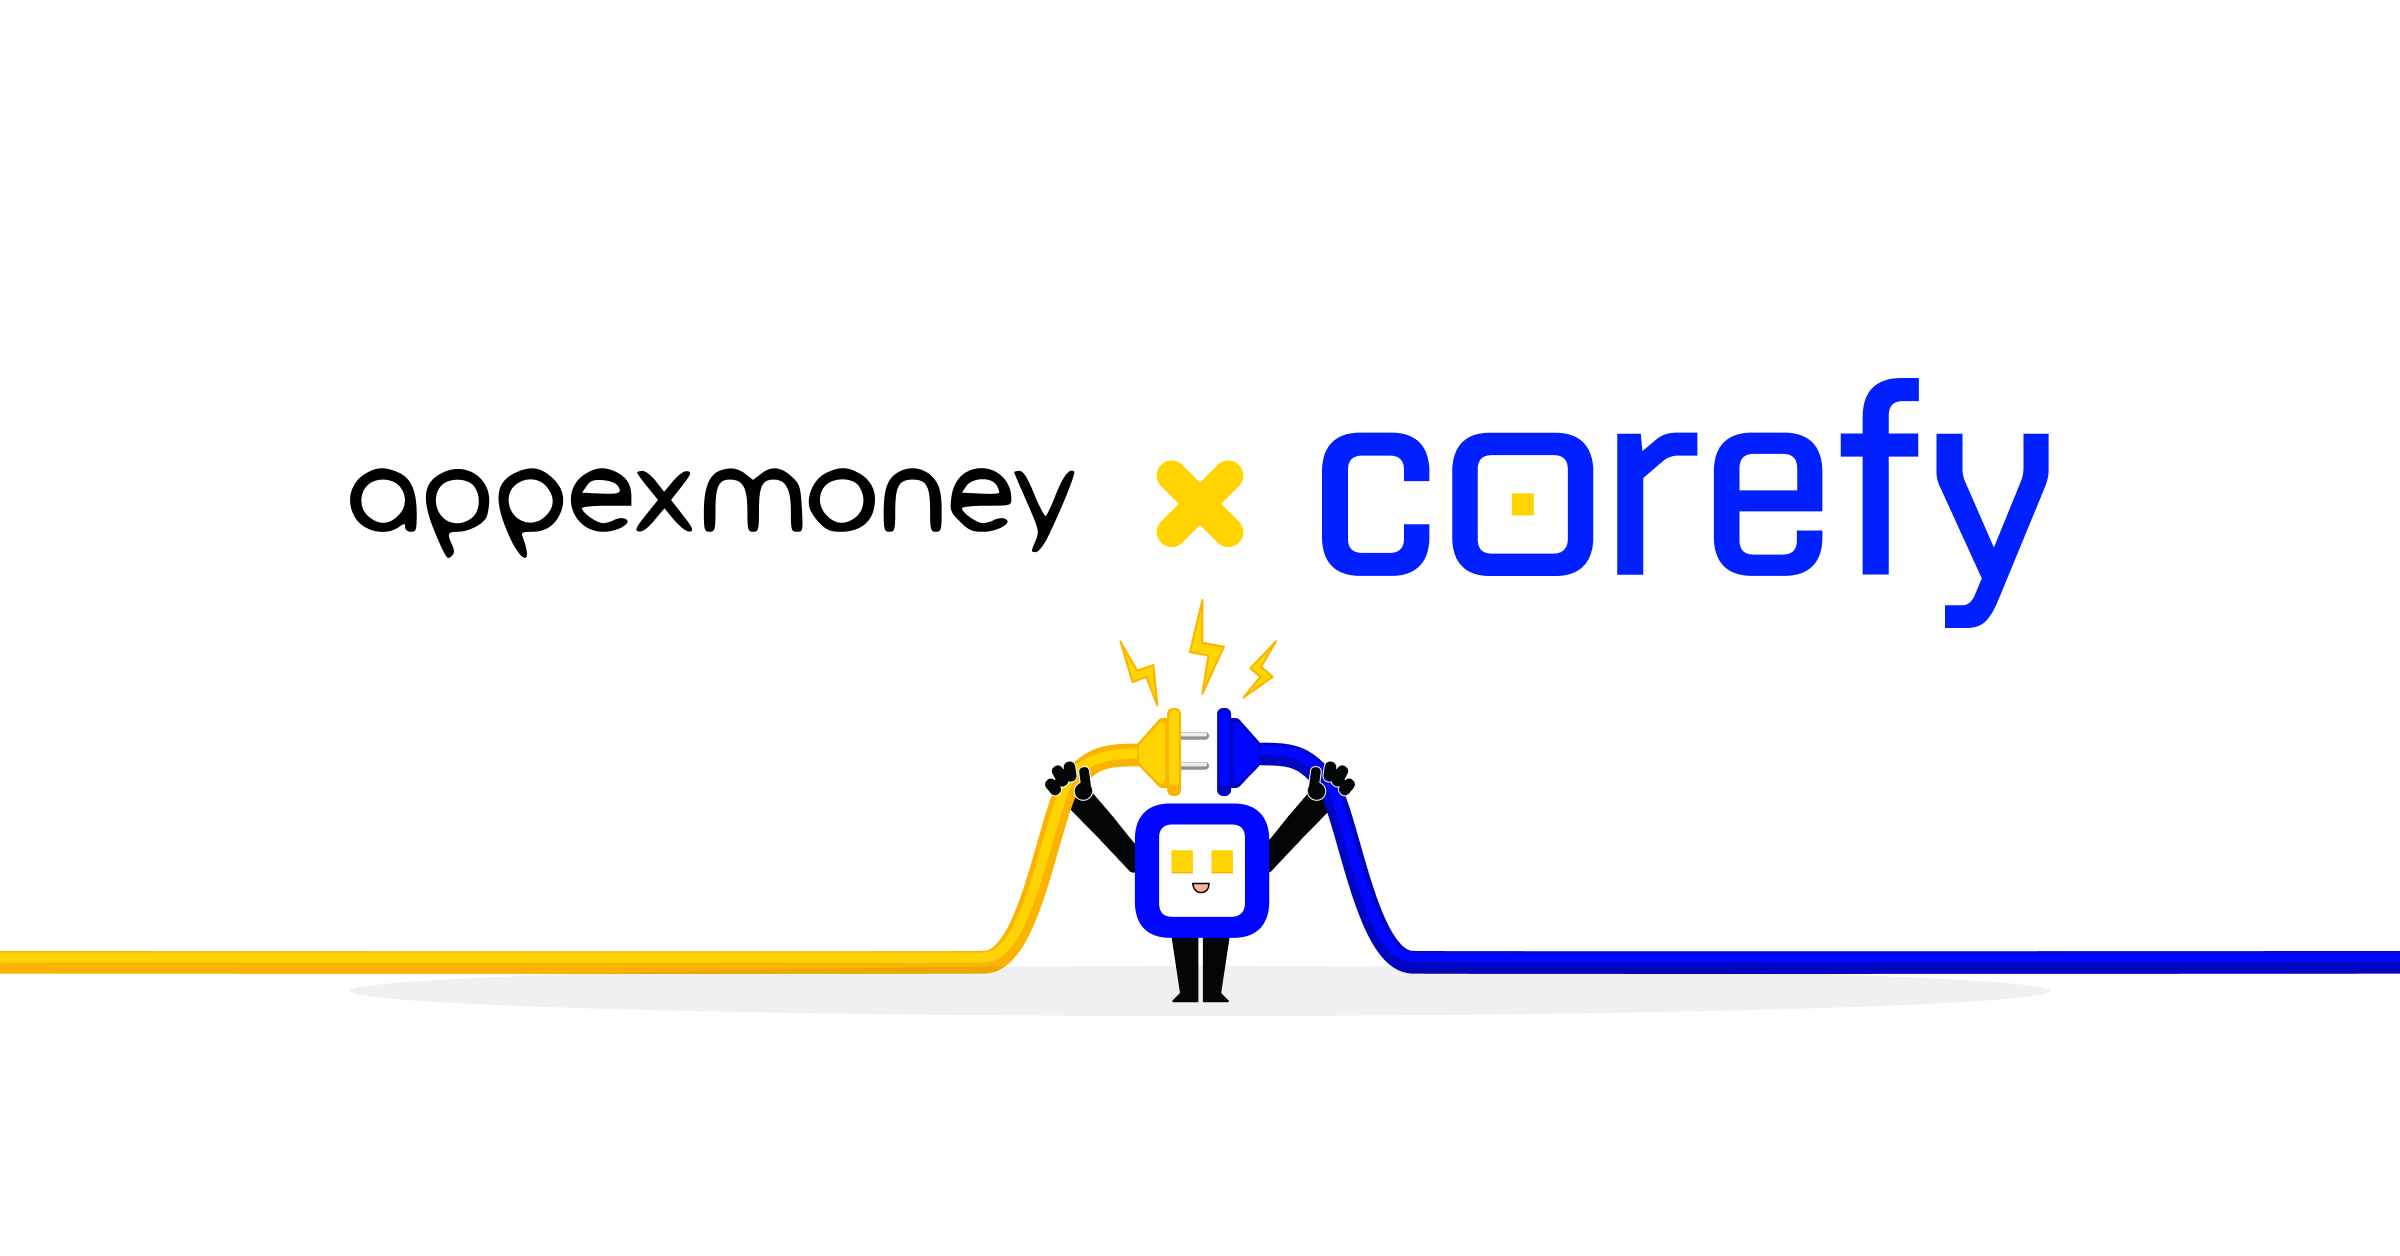 New integration with Appexmoney